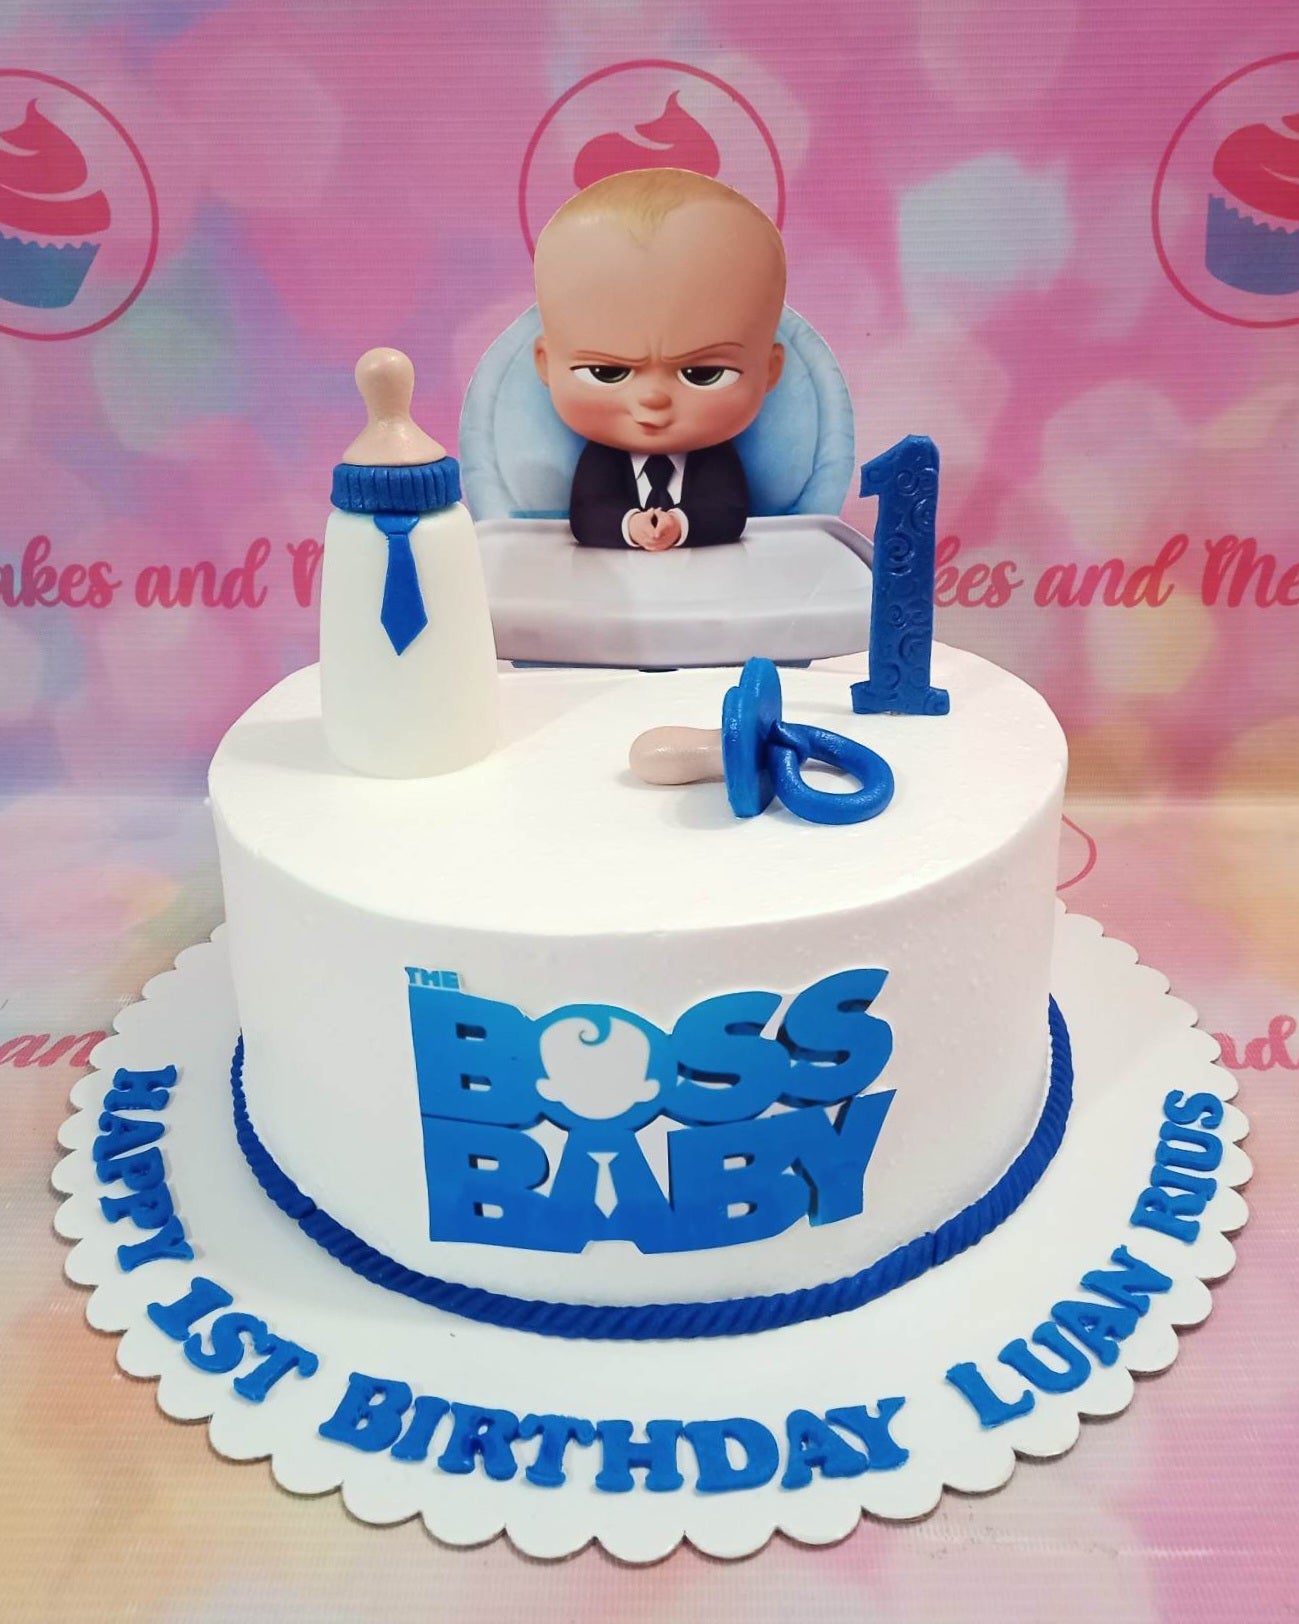 personalised, party

This Boss Baby Cake is a personalised and customised cake for special occasions. It is great for a 1st birthday with its white, blue and baby bottle design, along with a pacifier. It is sure to make any occasion memorable with its fantastic cartoon design.